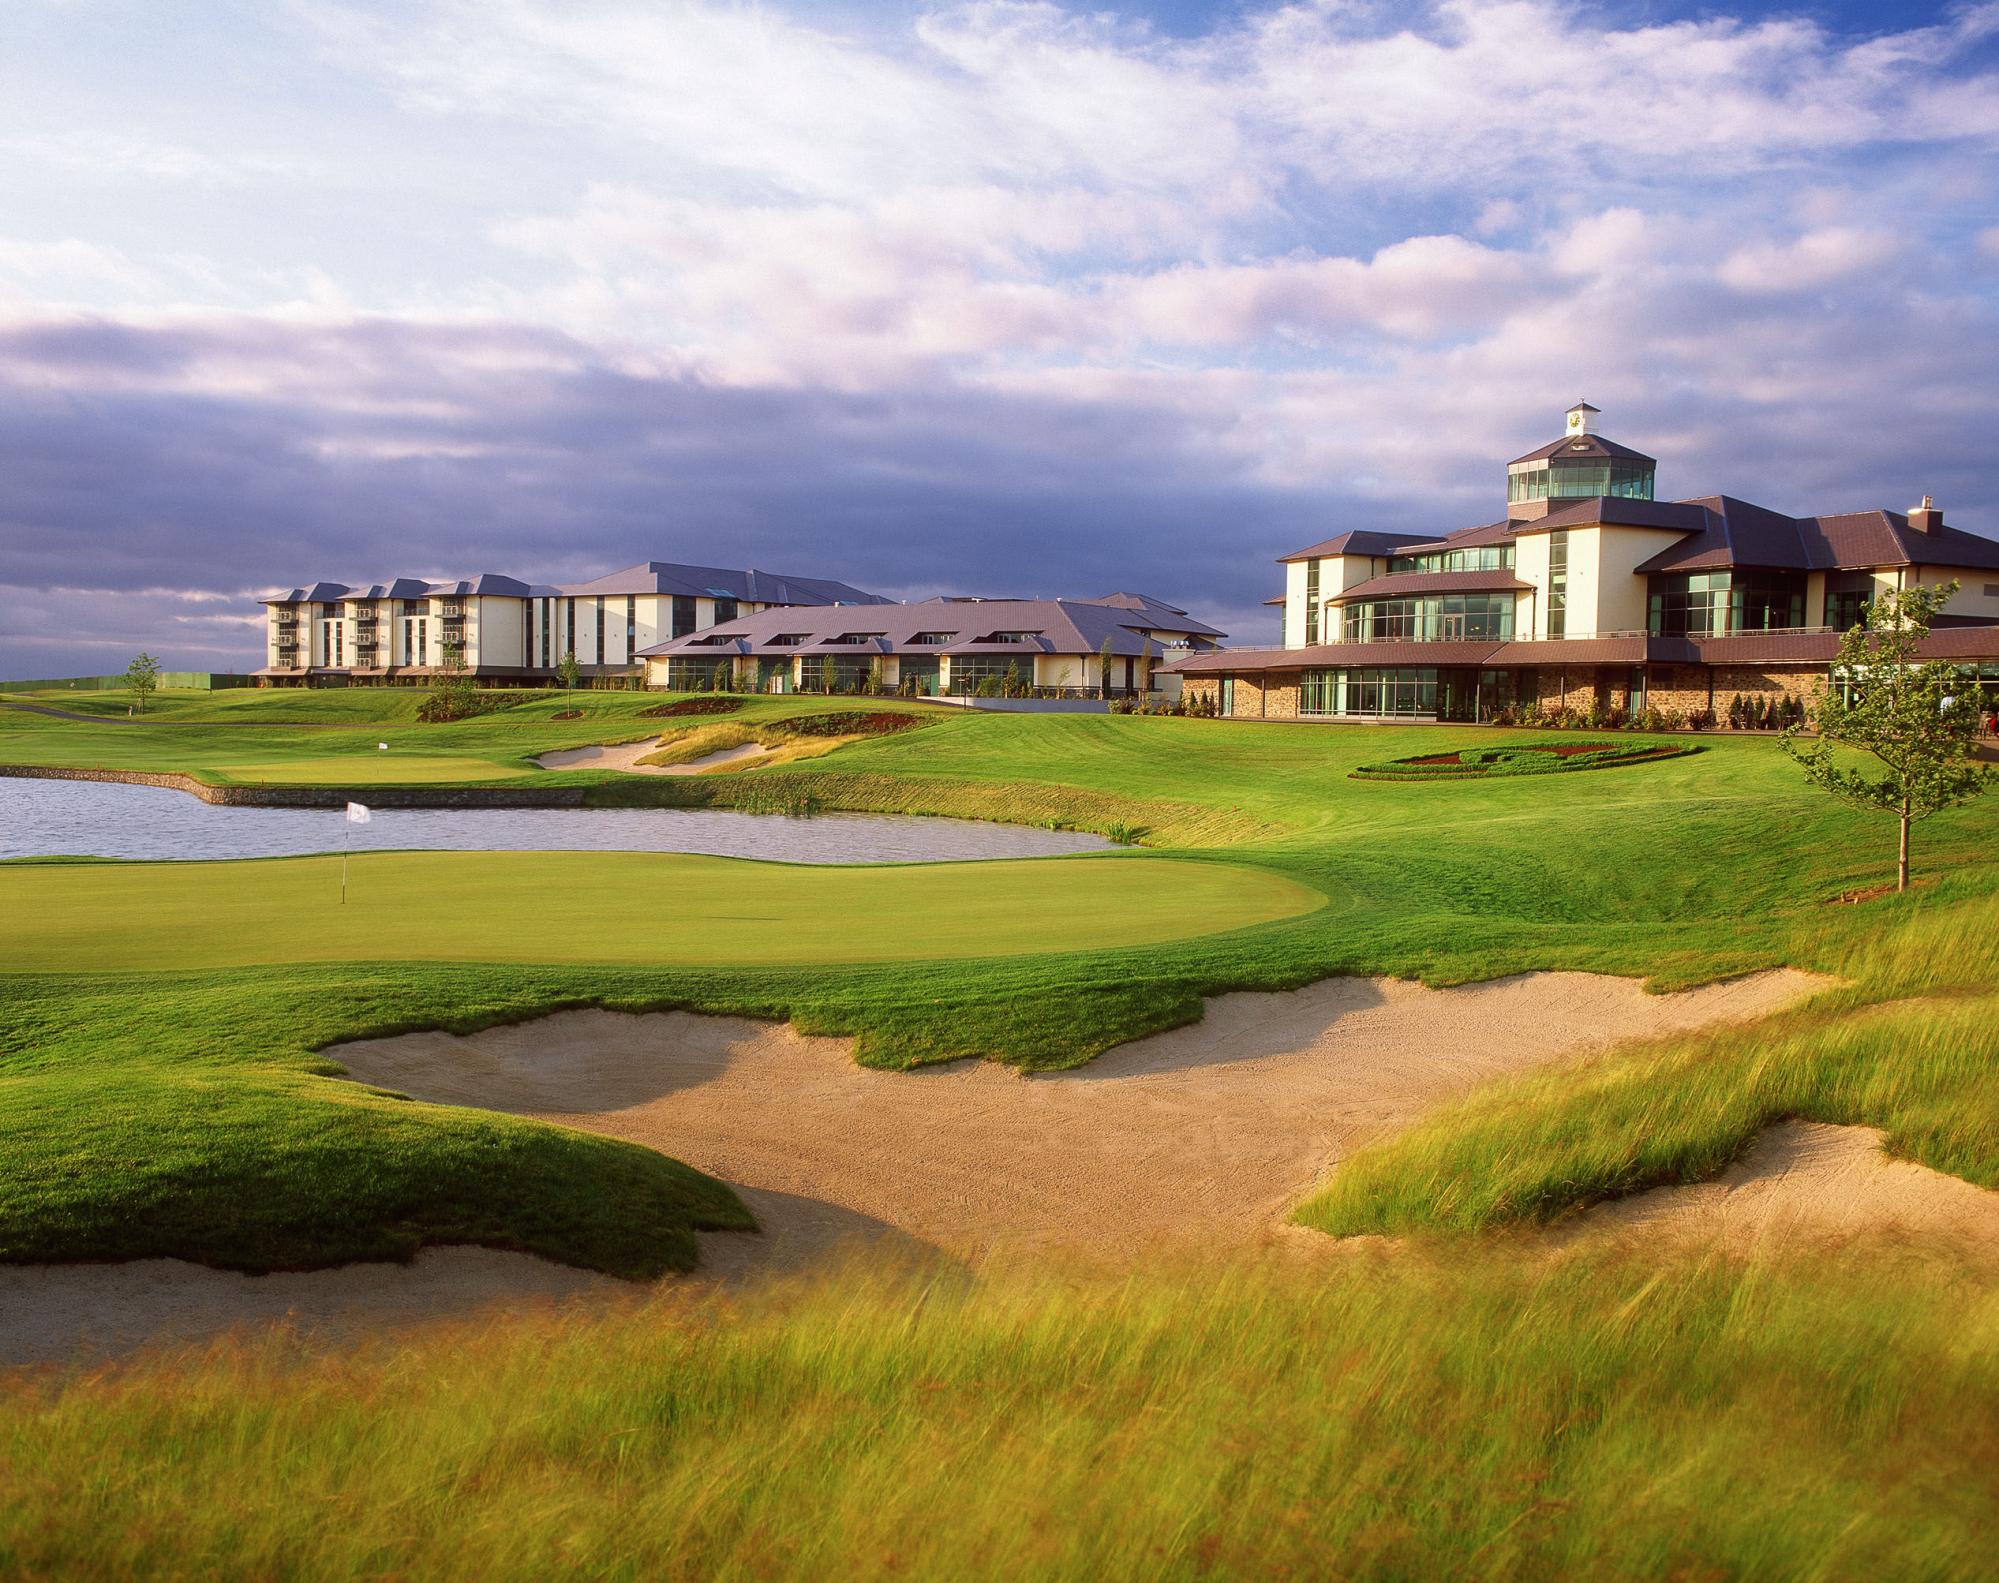 The Heritage Golf Resort's impressive hotel situated in amazing Southern Ireland.